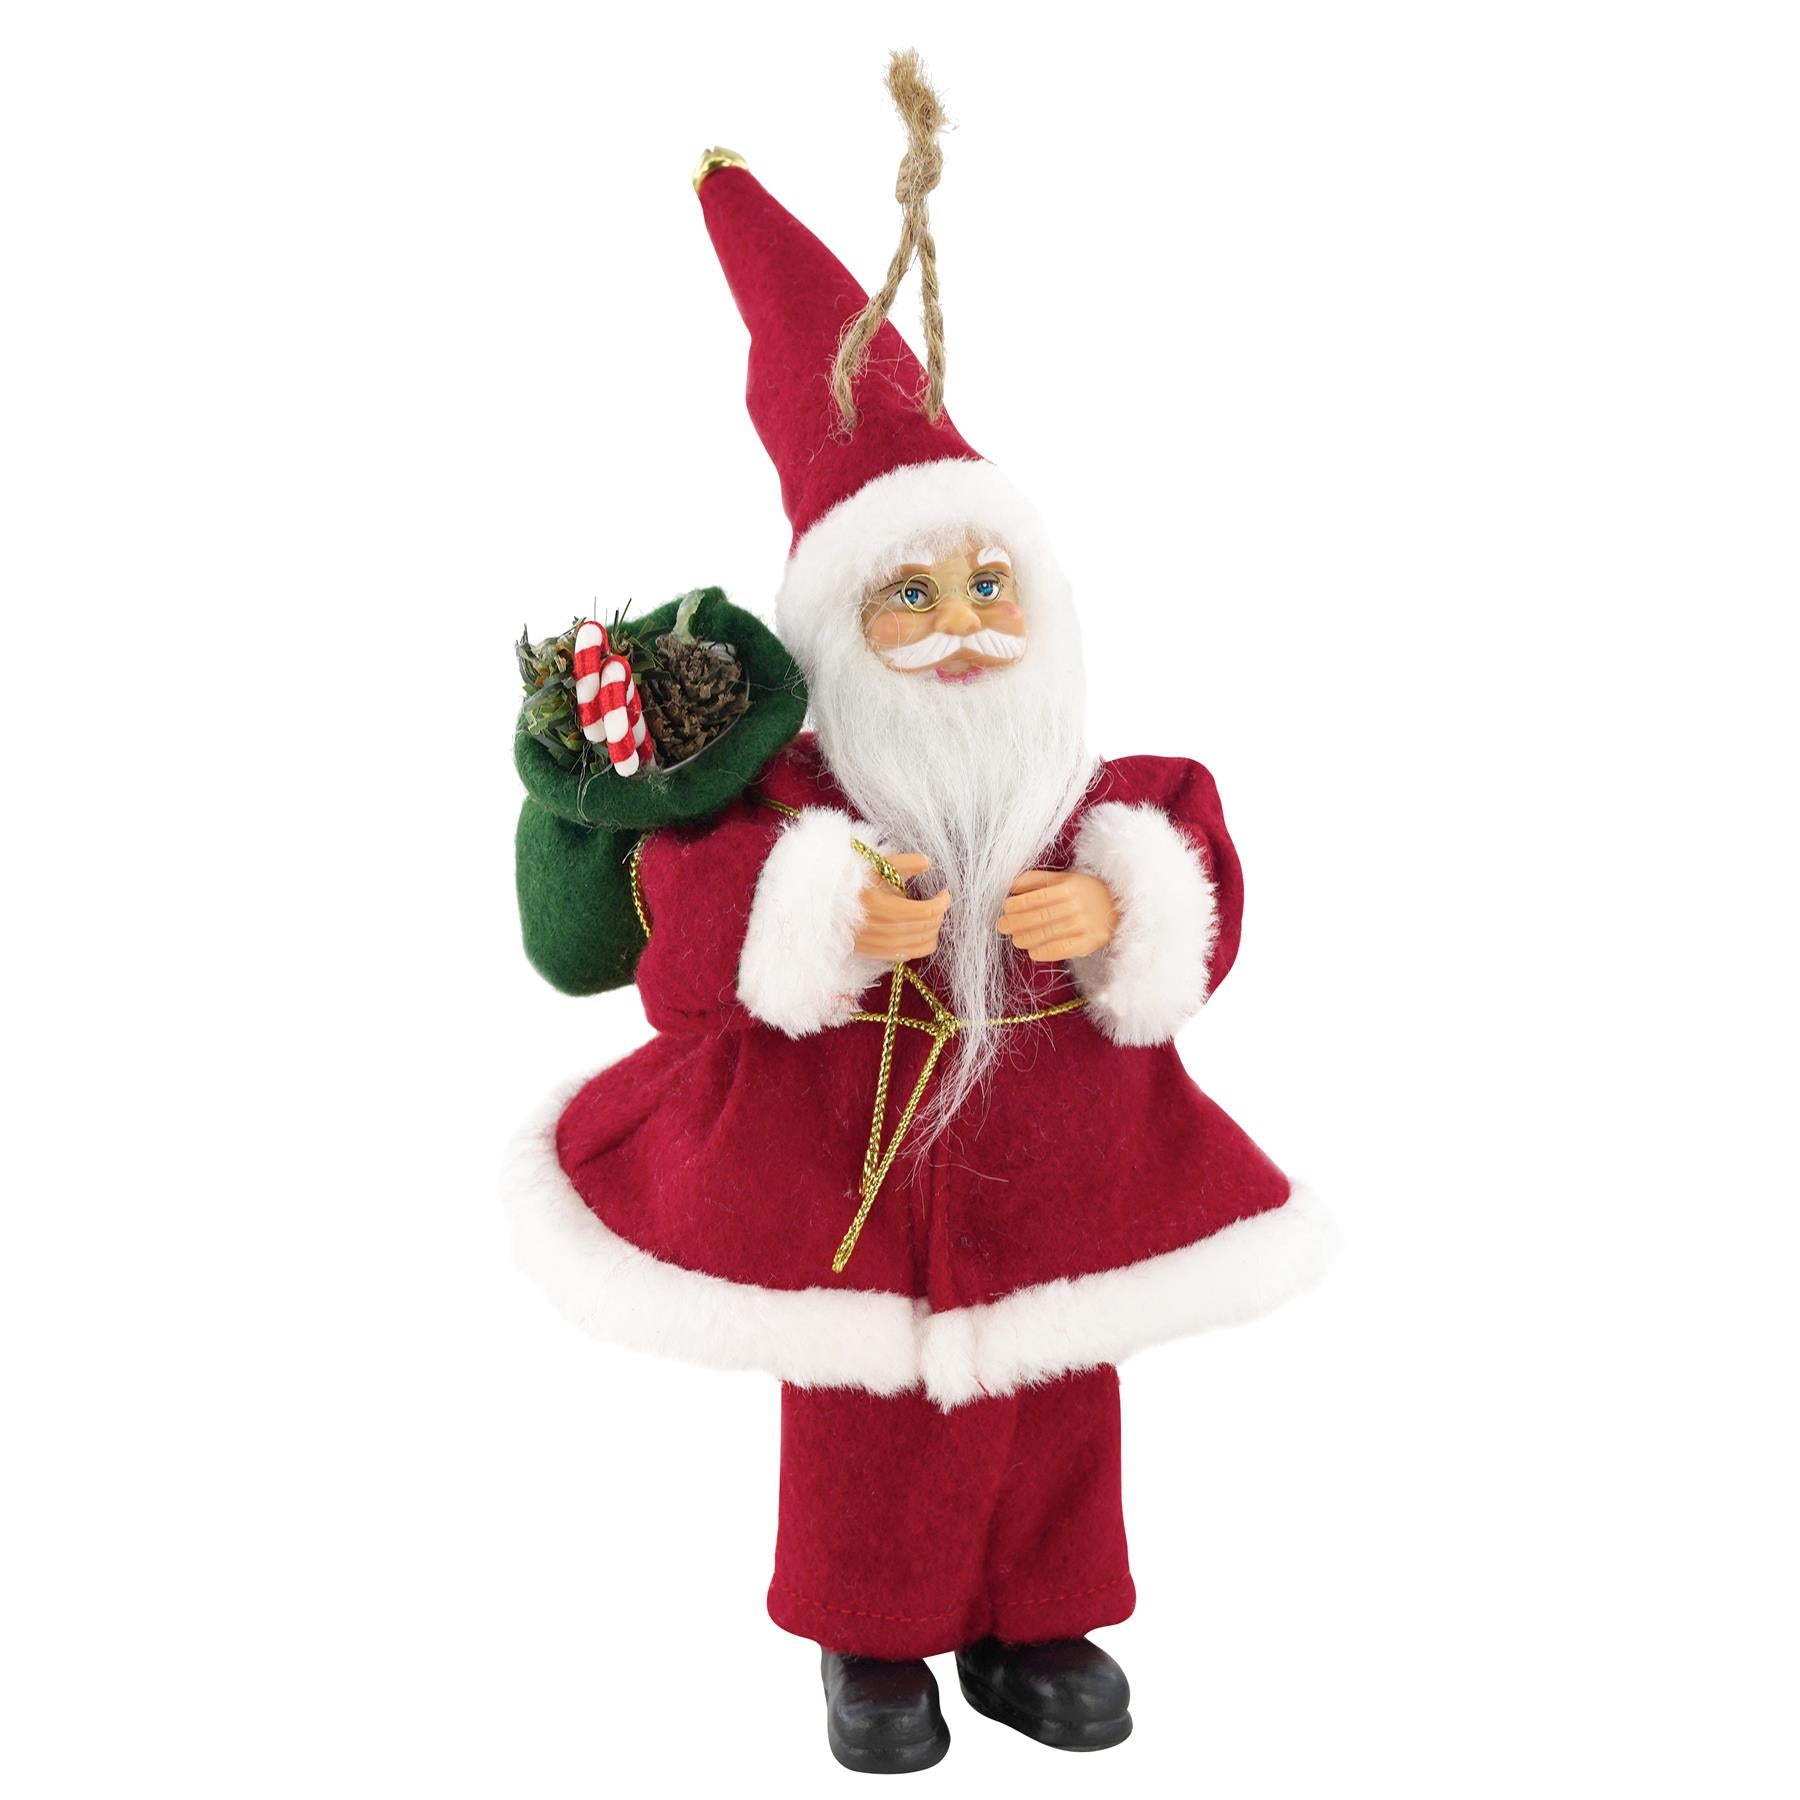 The Magic Toy Shop Christmas Decoration Standing Small Santa Claus